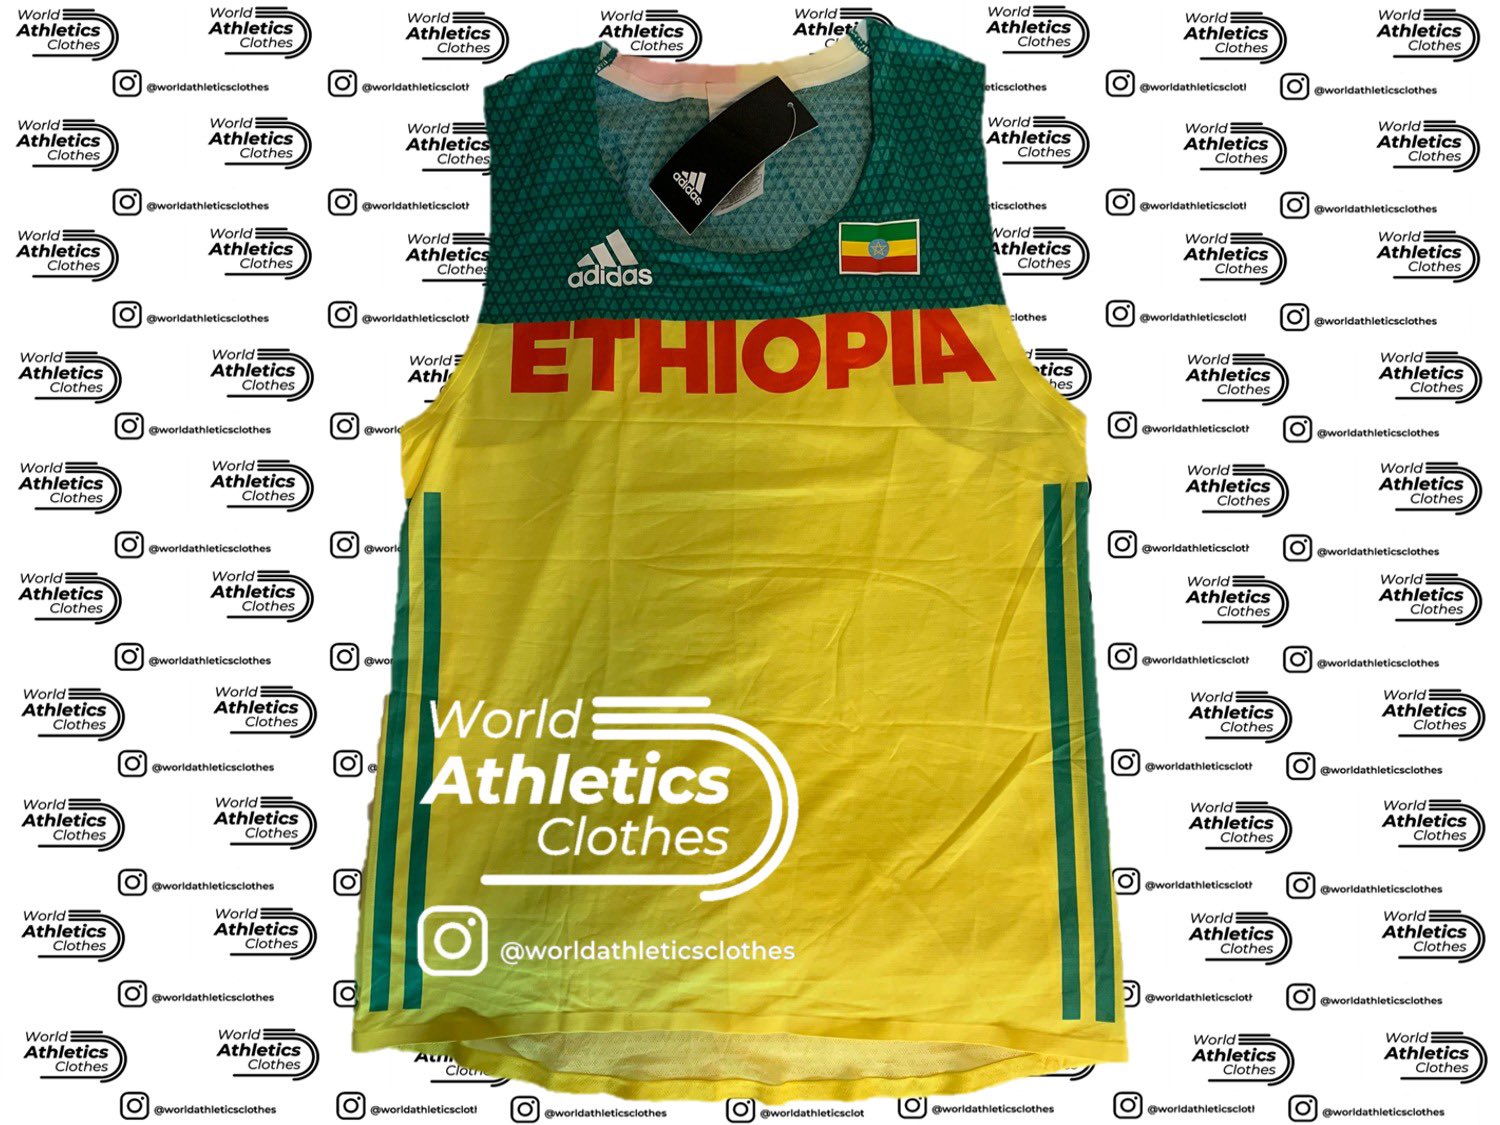 World Athletics Clothes Twitter: "💥𝘼𝙑𝘼𝙄𝙇𝘼𝘽𝙇𝙀💥 🇪🇹 Ethiopia Adidas Pro Elite singlet ➡️ Size: S‼️ ✈𝑺𝒉𝒊𝒑𝒑𝒊𝒏𝒈 𝒆𝒗𝒆𝒓𝒚𝒘𝒉𝒆𝒓𝒆🌍 👉𝘚𝘦𝘯𝘥 𝘢 DM with your offer 📥 #nikerunning #running #usatf #nike ...